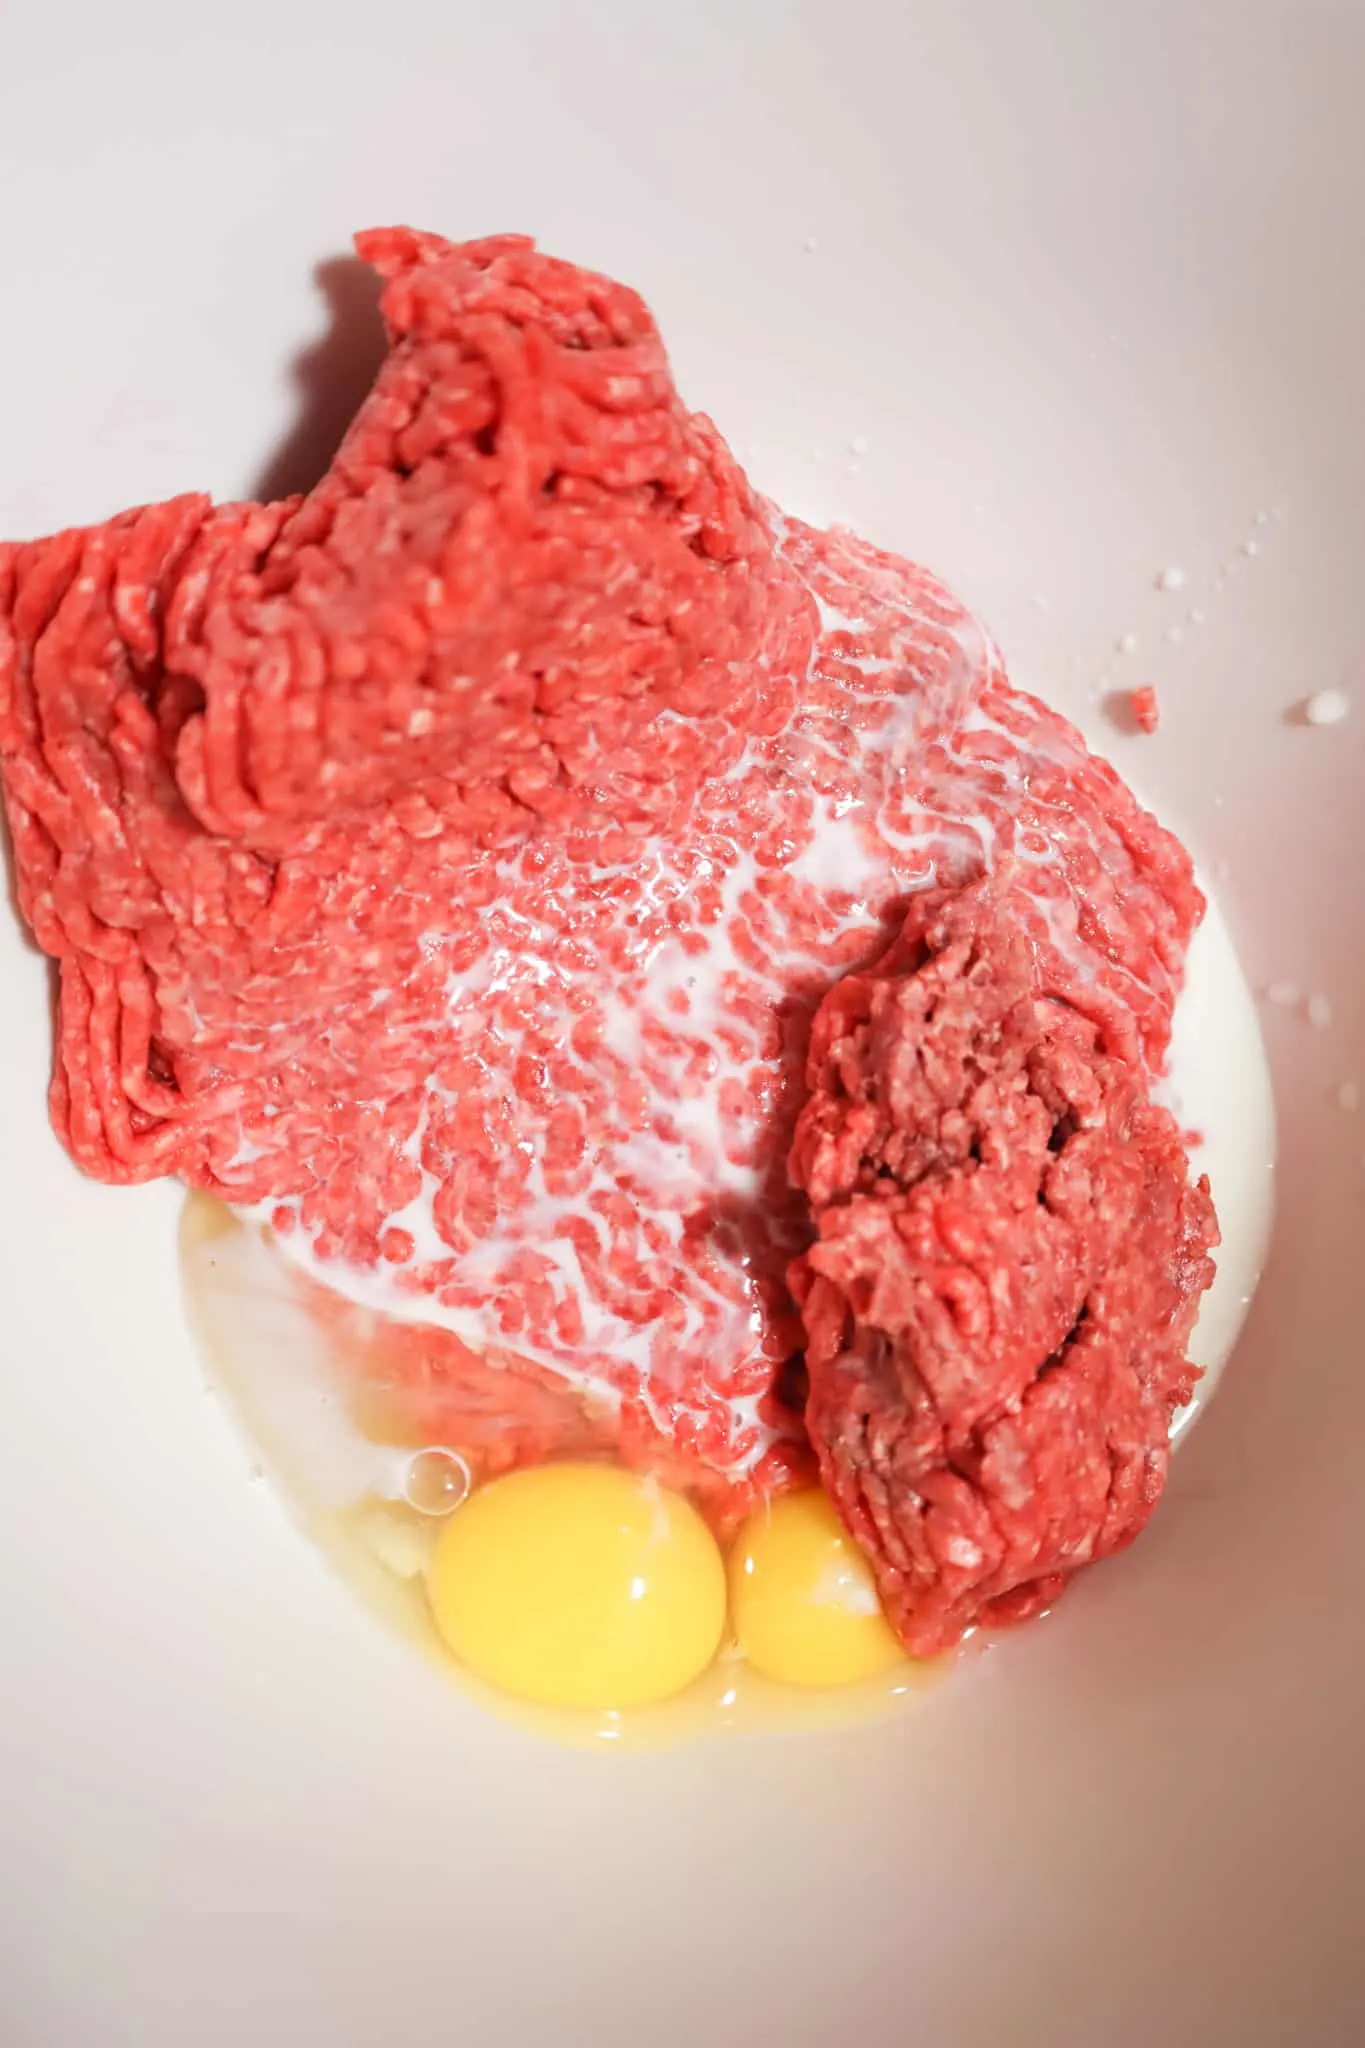 milk, eggs and lean ground beef in a mixing bowl